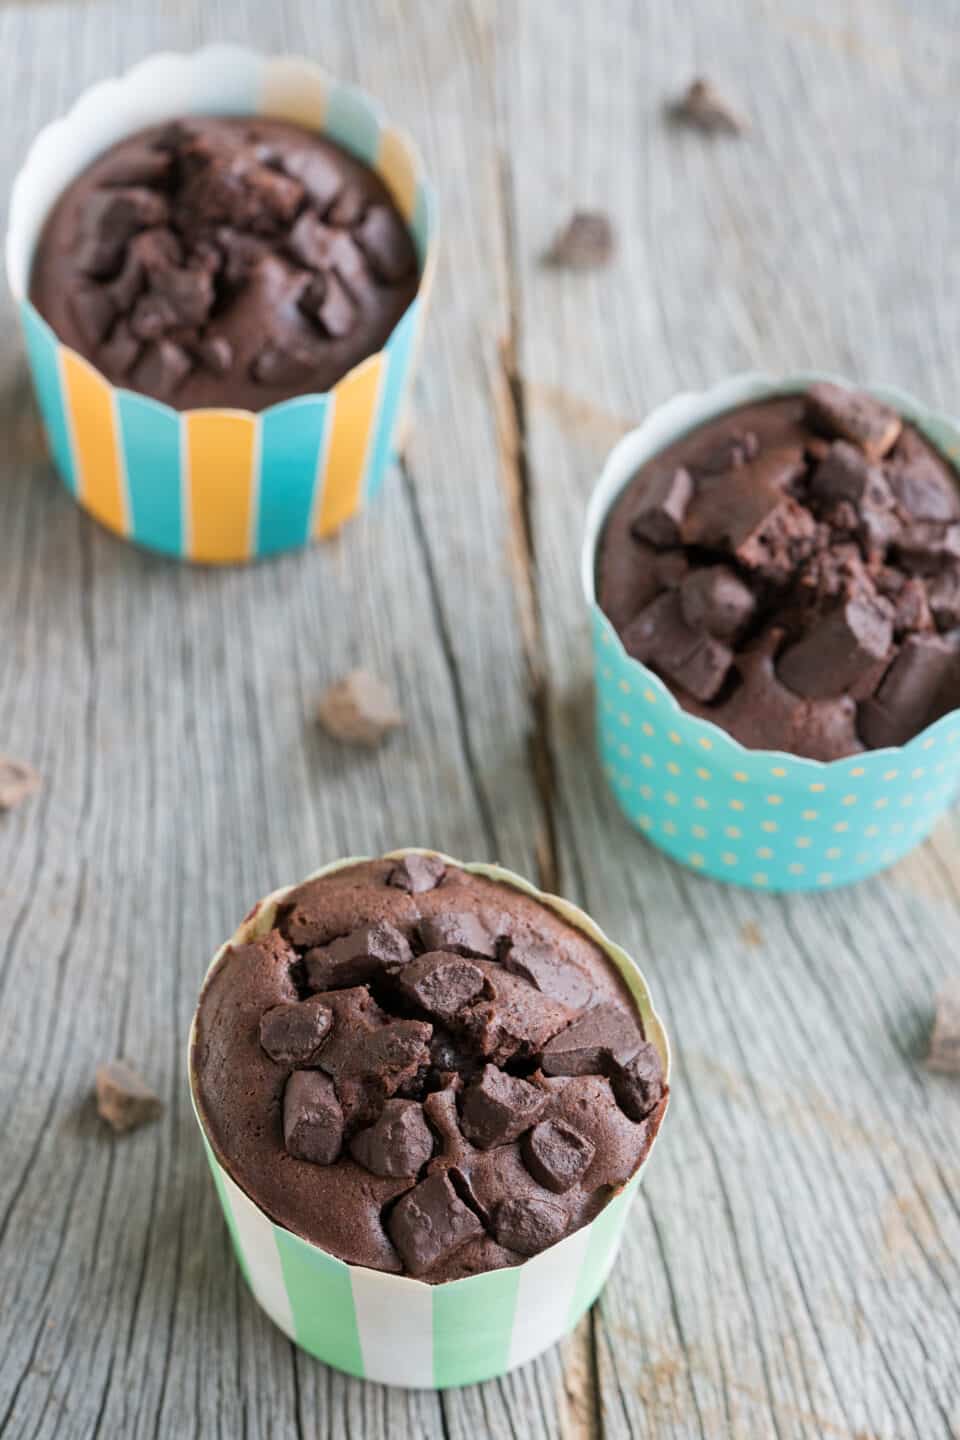 Chocolate muffins with chocolate chips